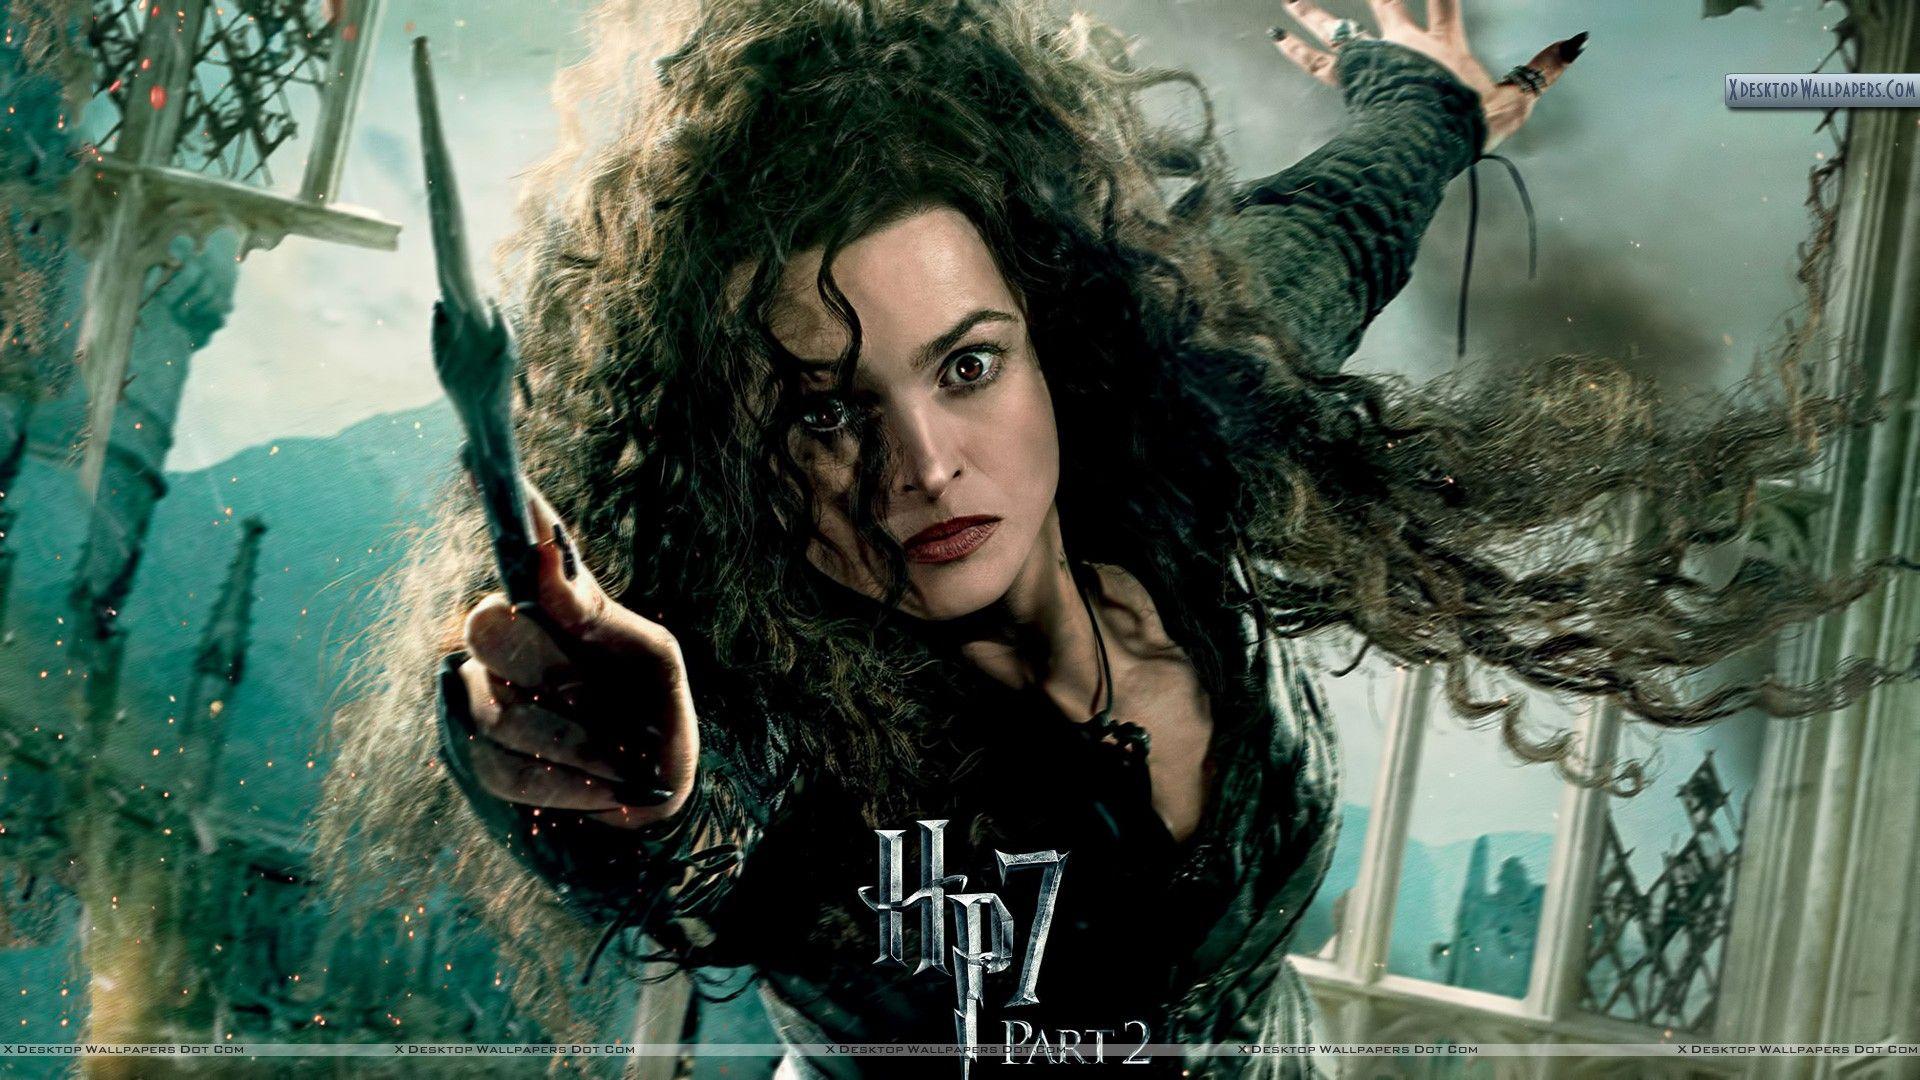 Helena Bonham Carter In Harry Potter And The Deathly Hallows Part